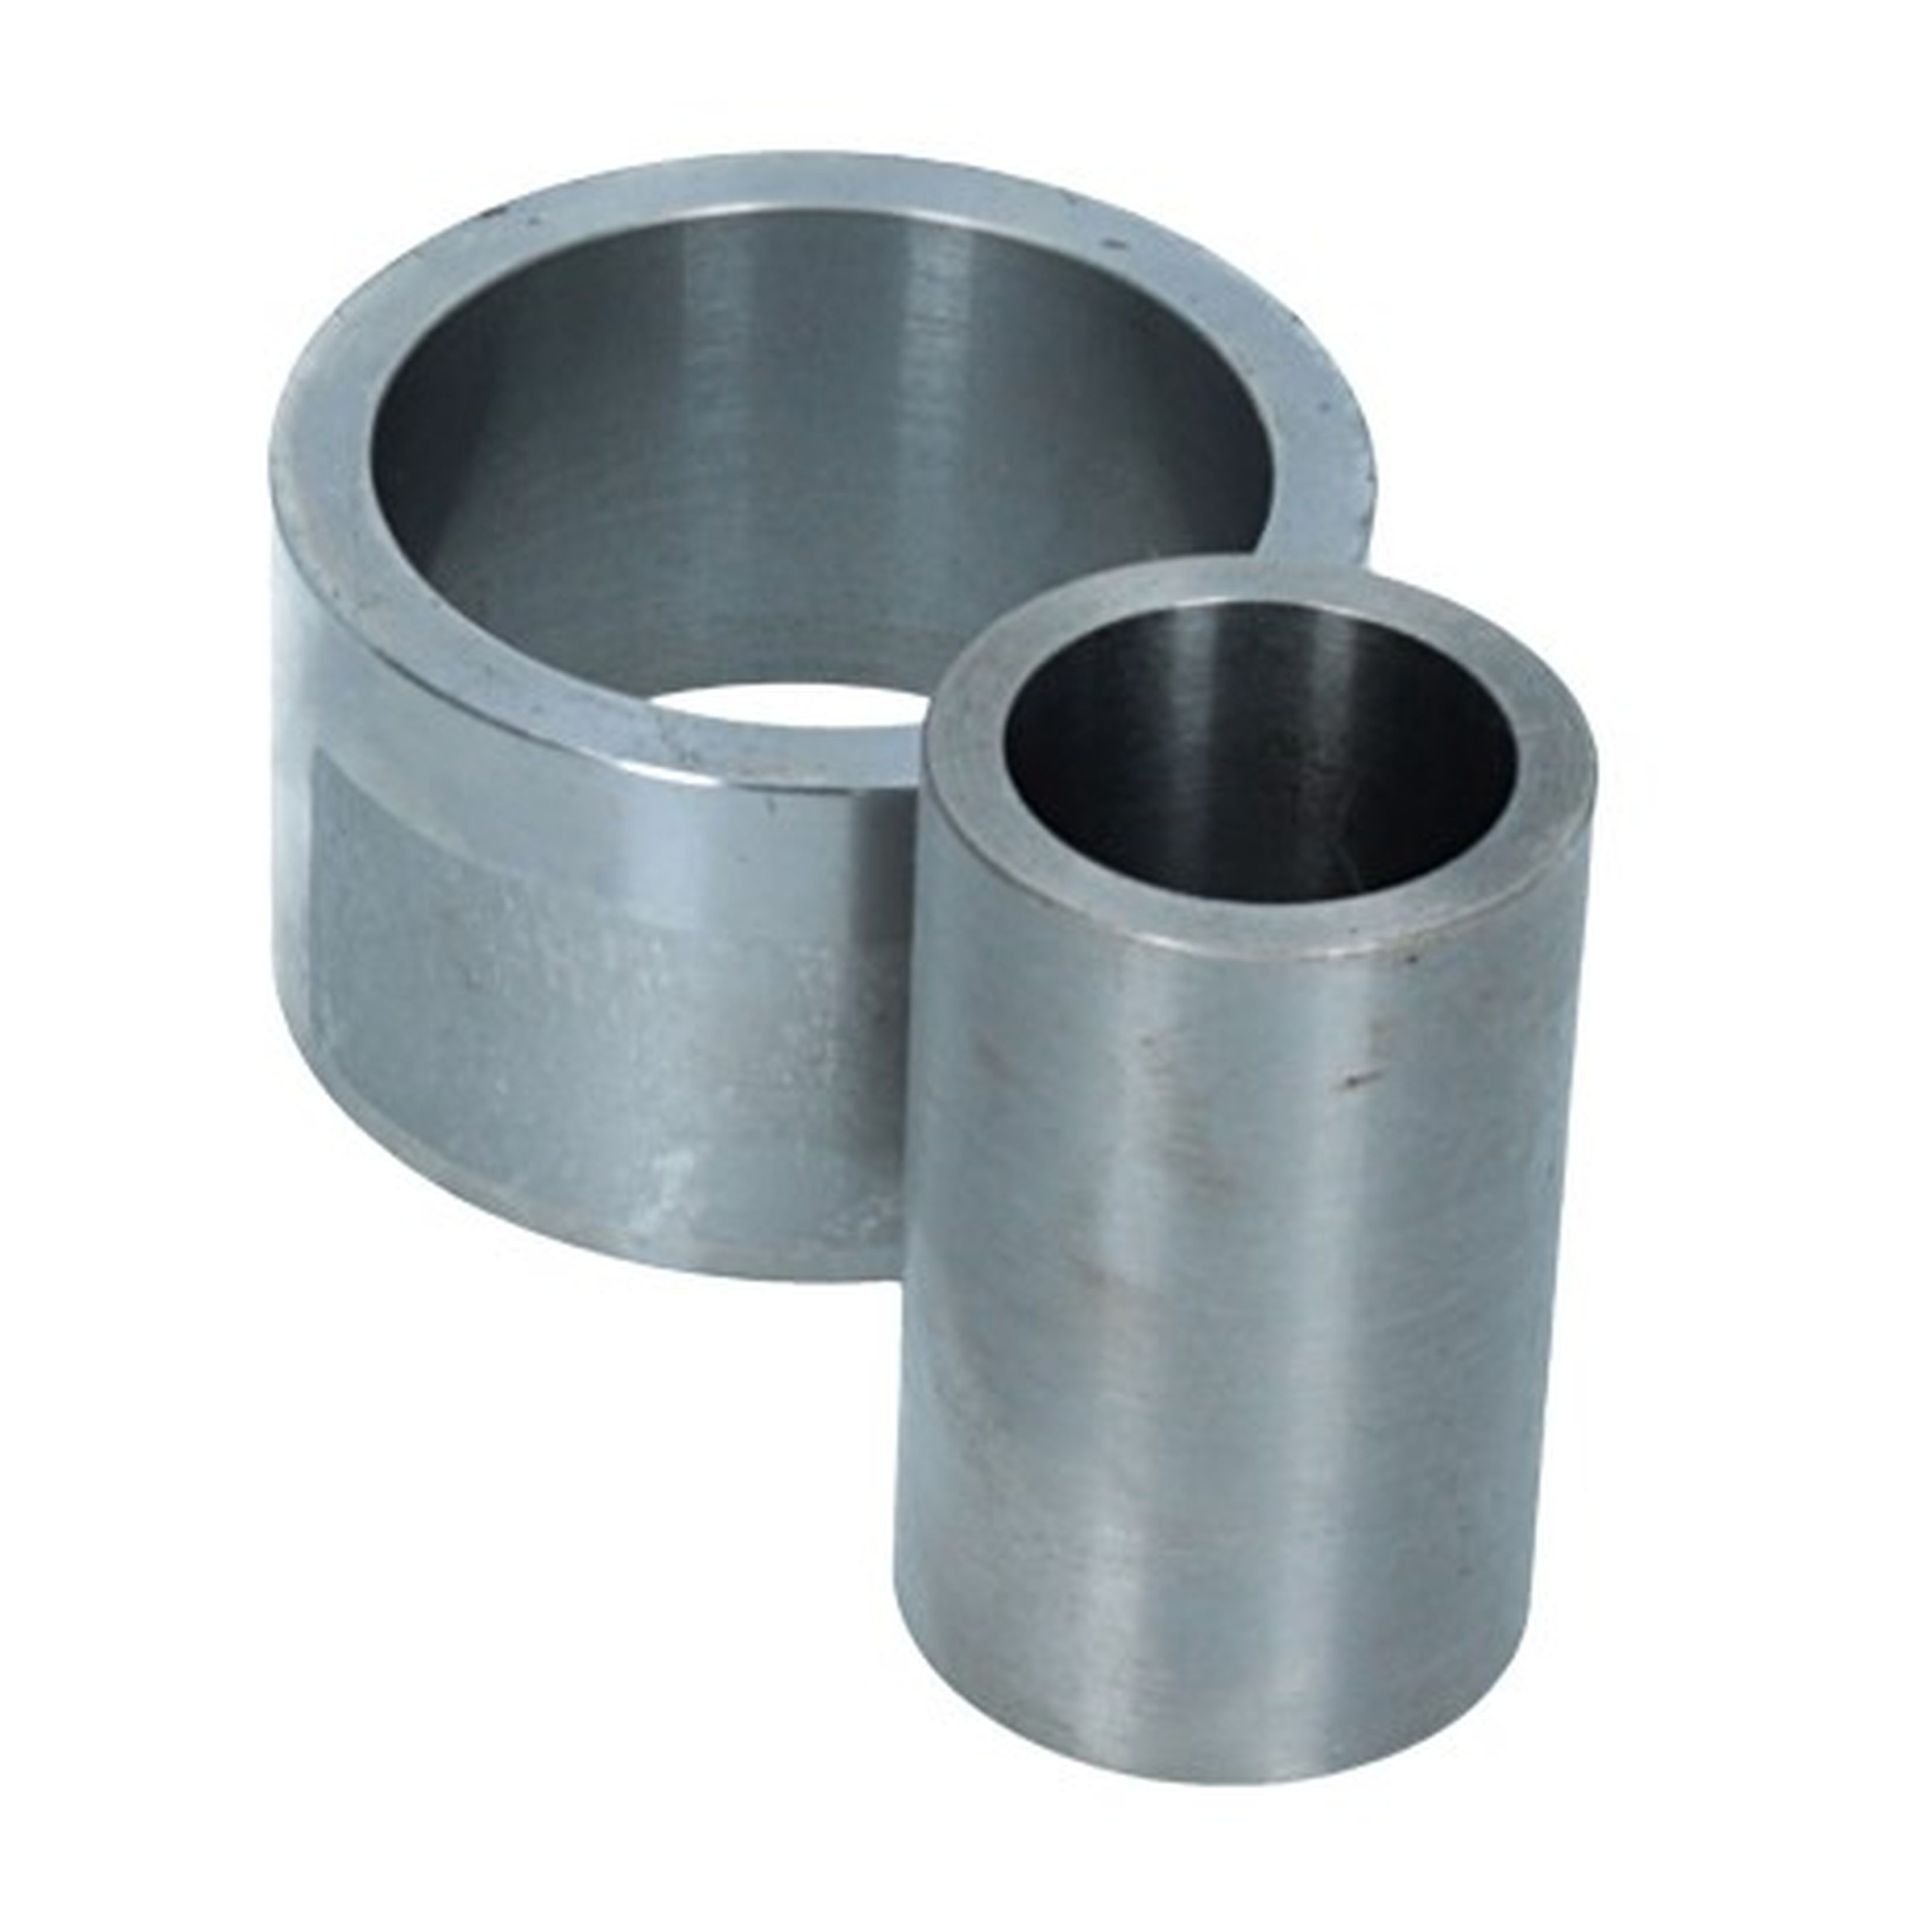 Pinion Bearing Spacer Pair Early 250